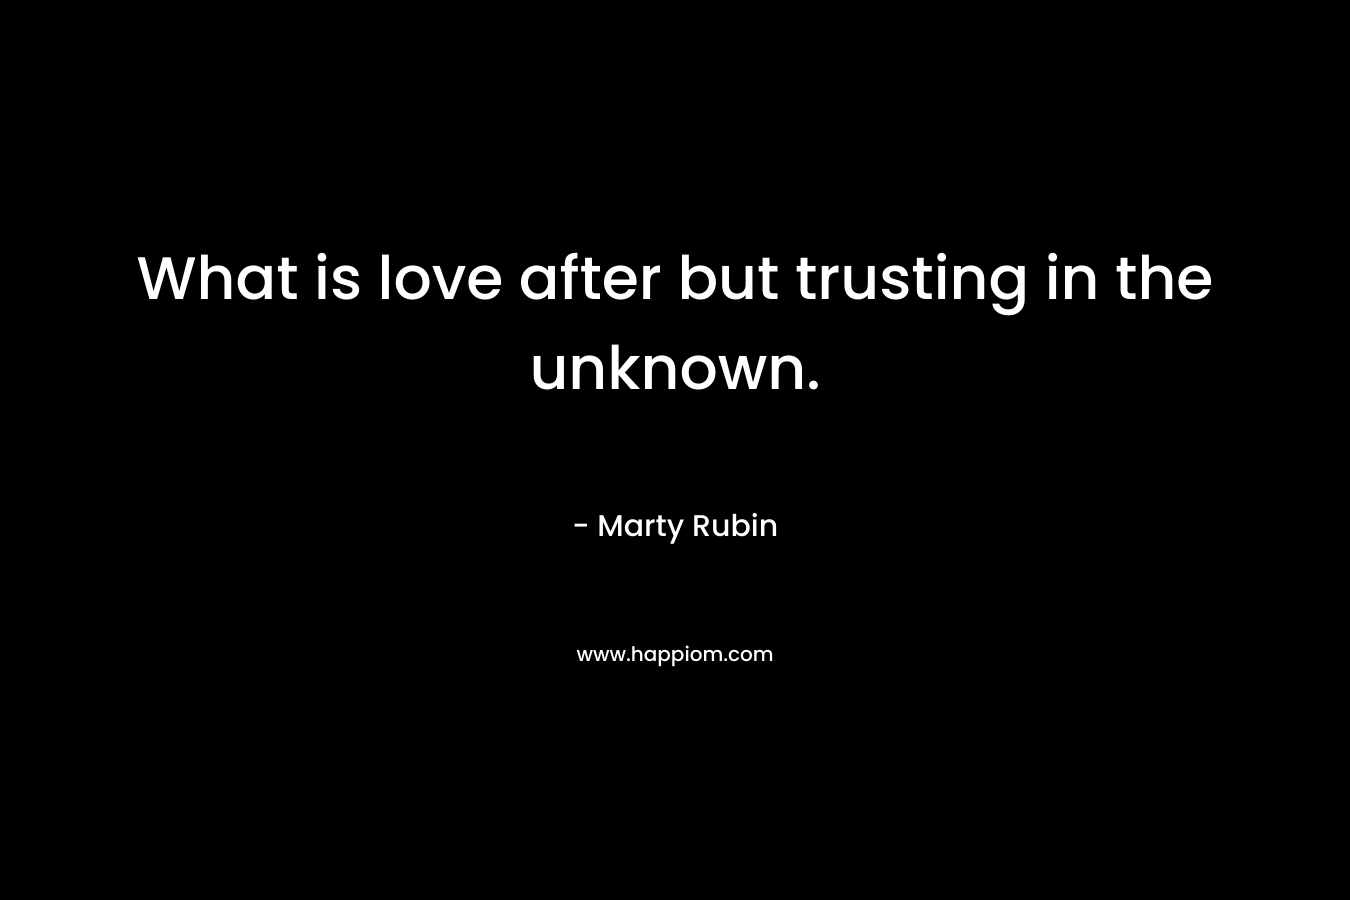 What is love after but trusting in the unknown.